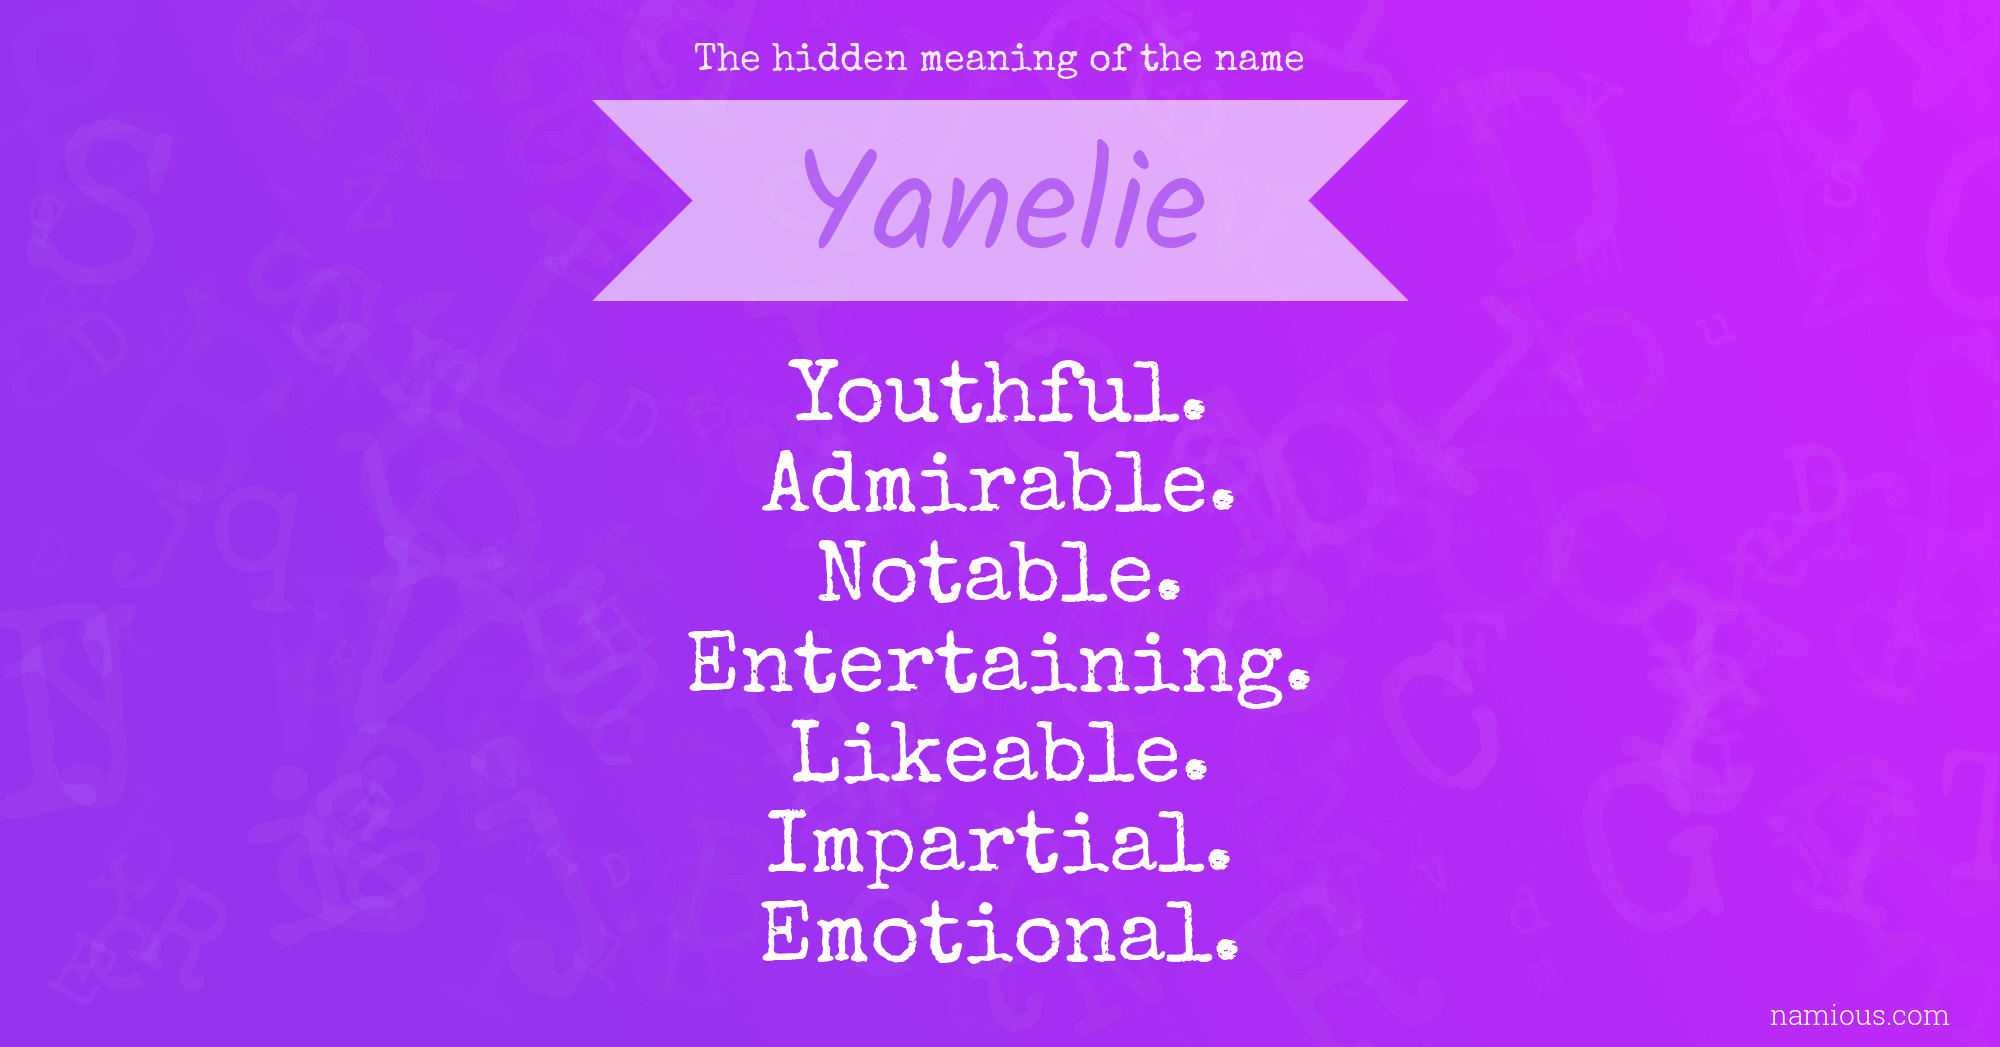 The hidden meaning of the name Yanelie